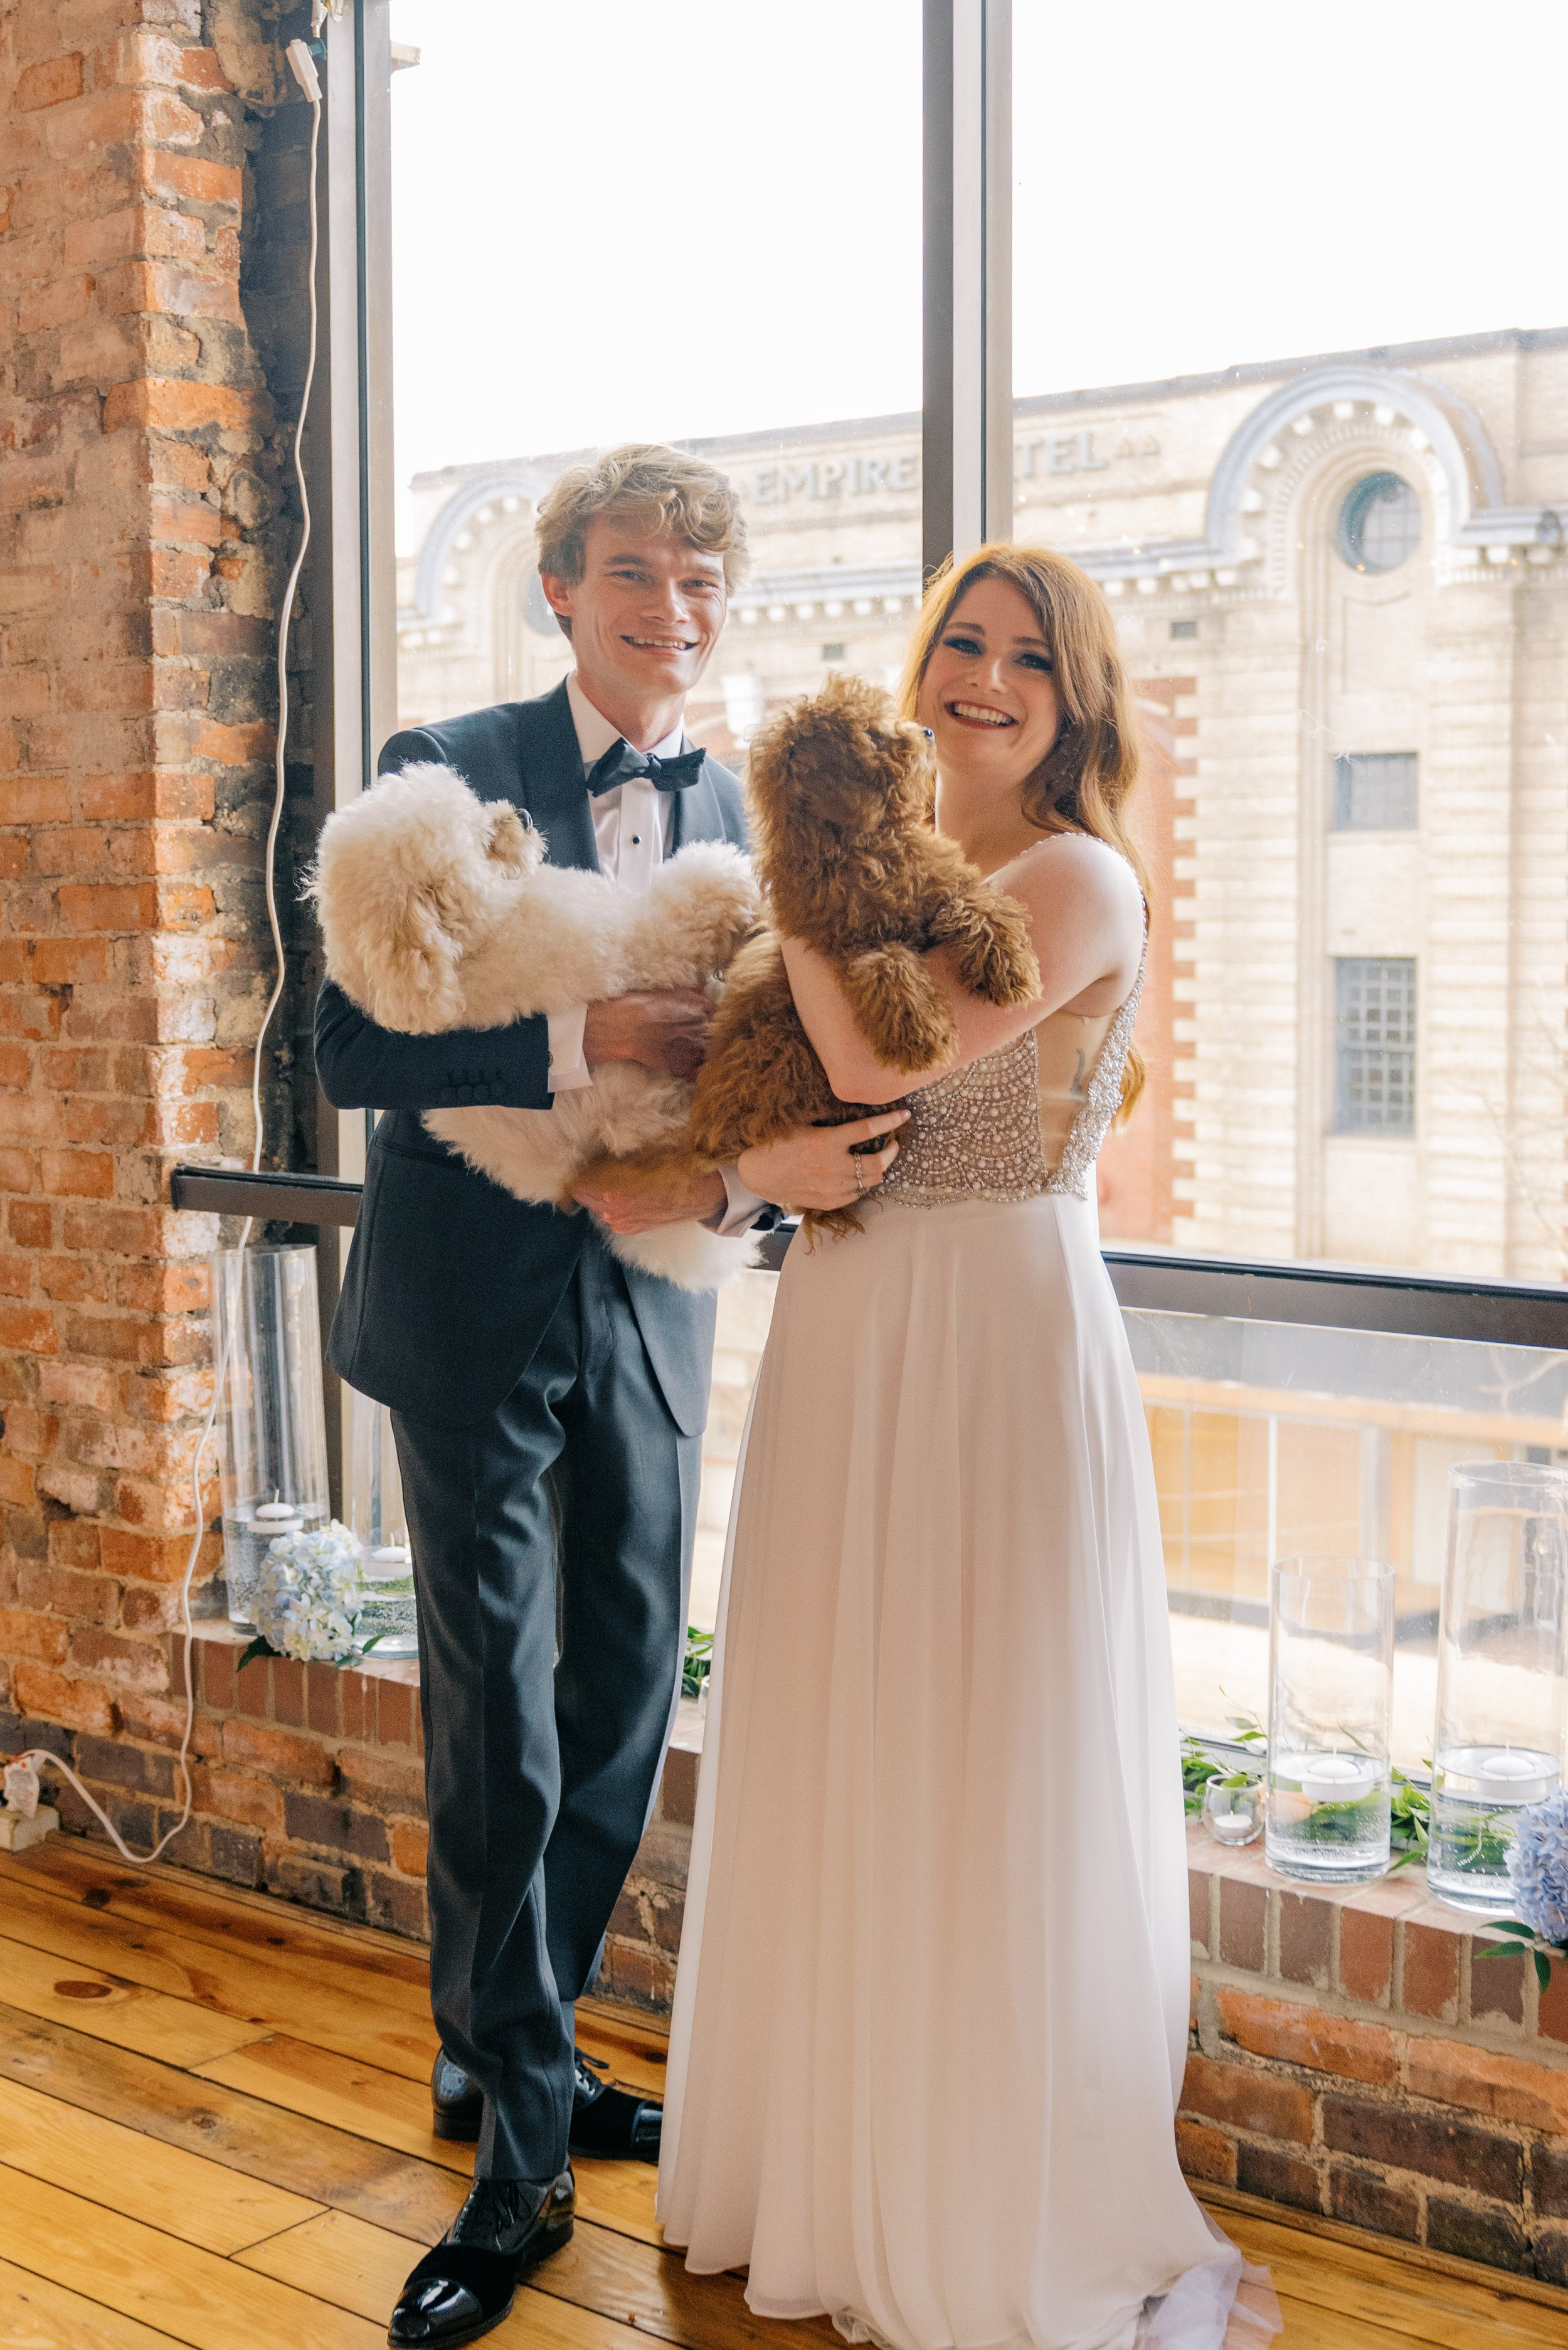 Couple with Puppies in Window Salisbury North Carolina Wedding at The Meroney Theater  Fancy This Photography